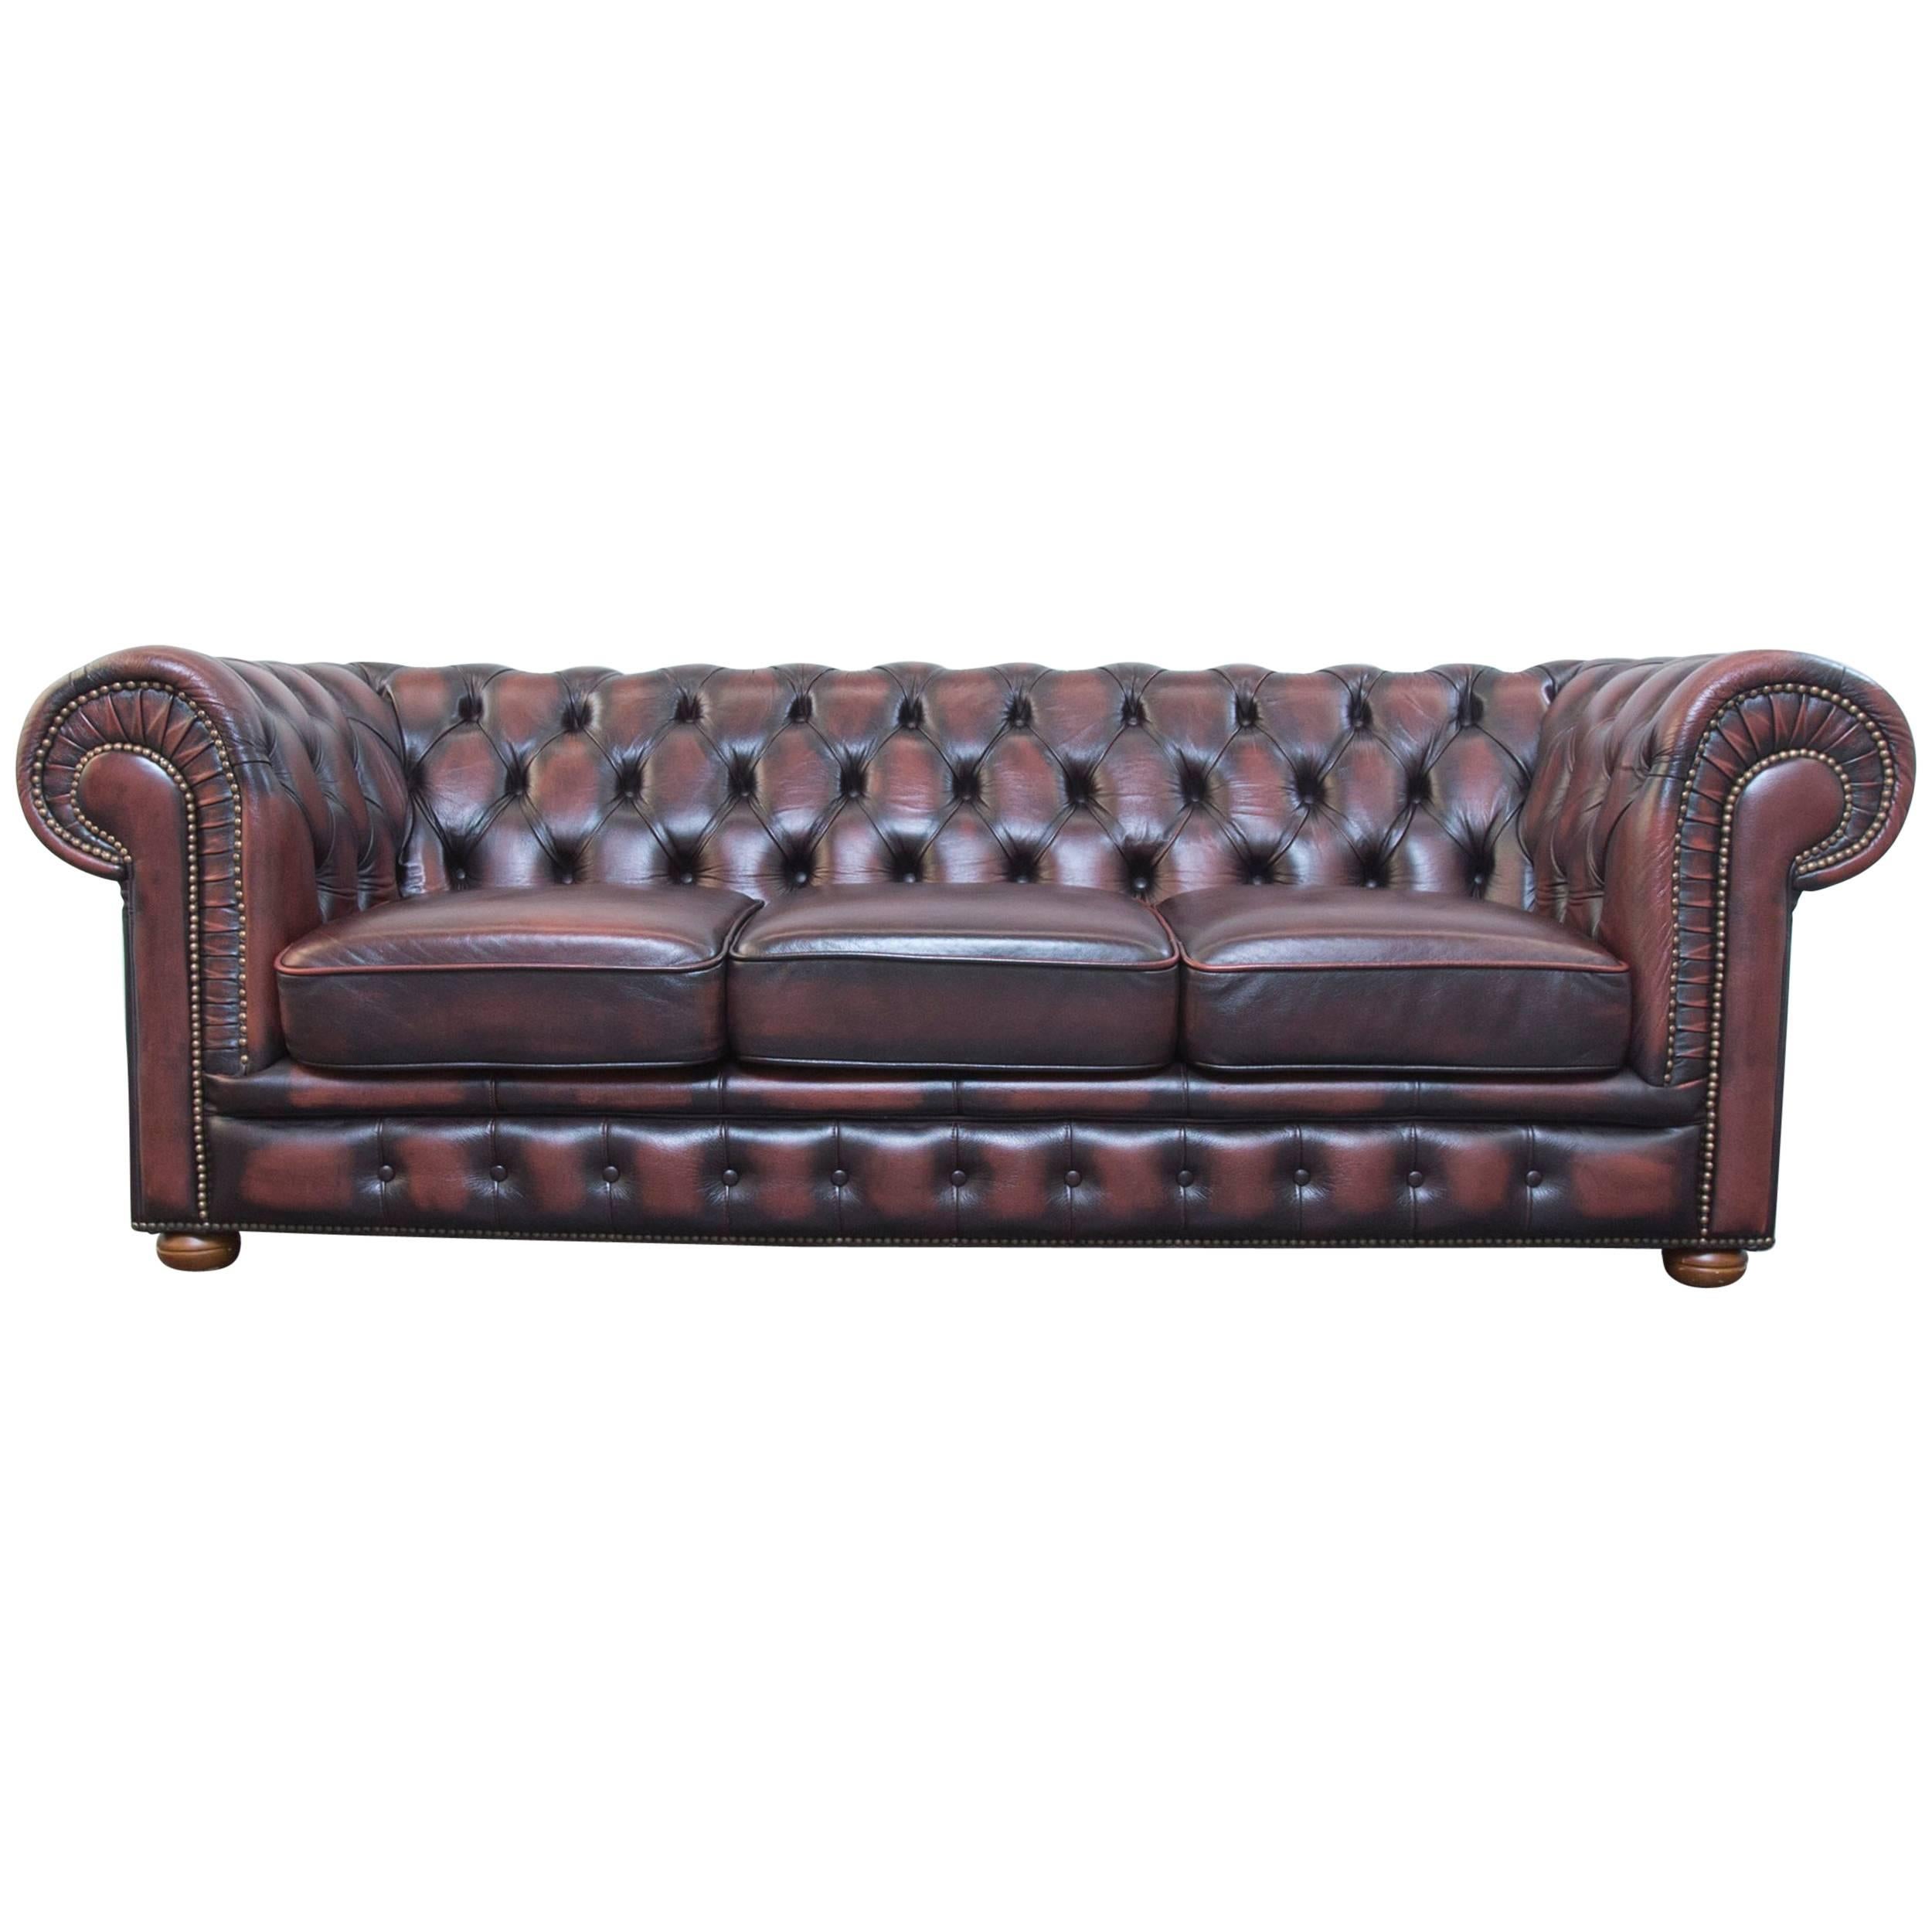 Original Chesterfield Leather Sofa Brown Three-Seat Couch Vintage Retro